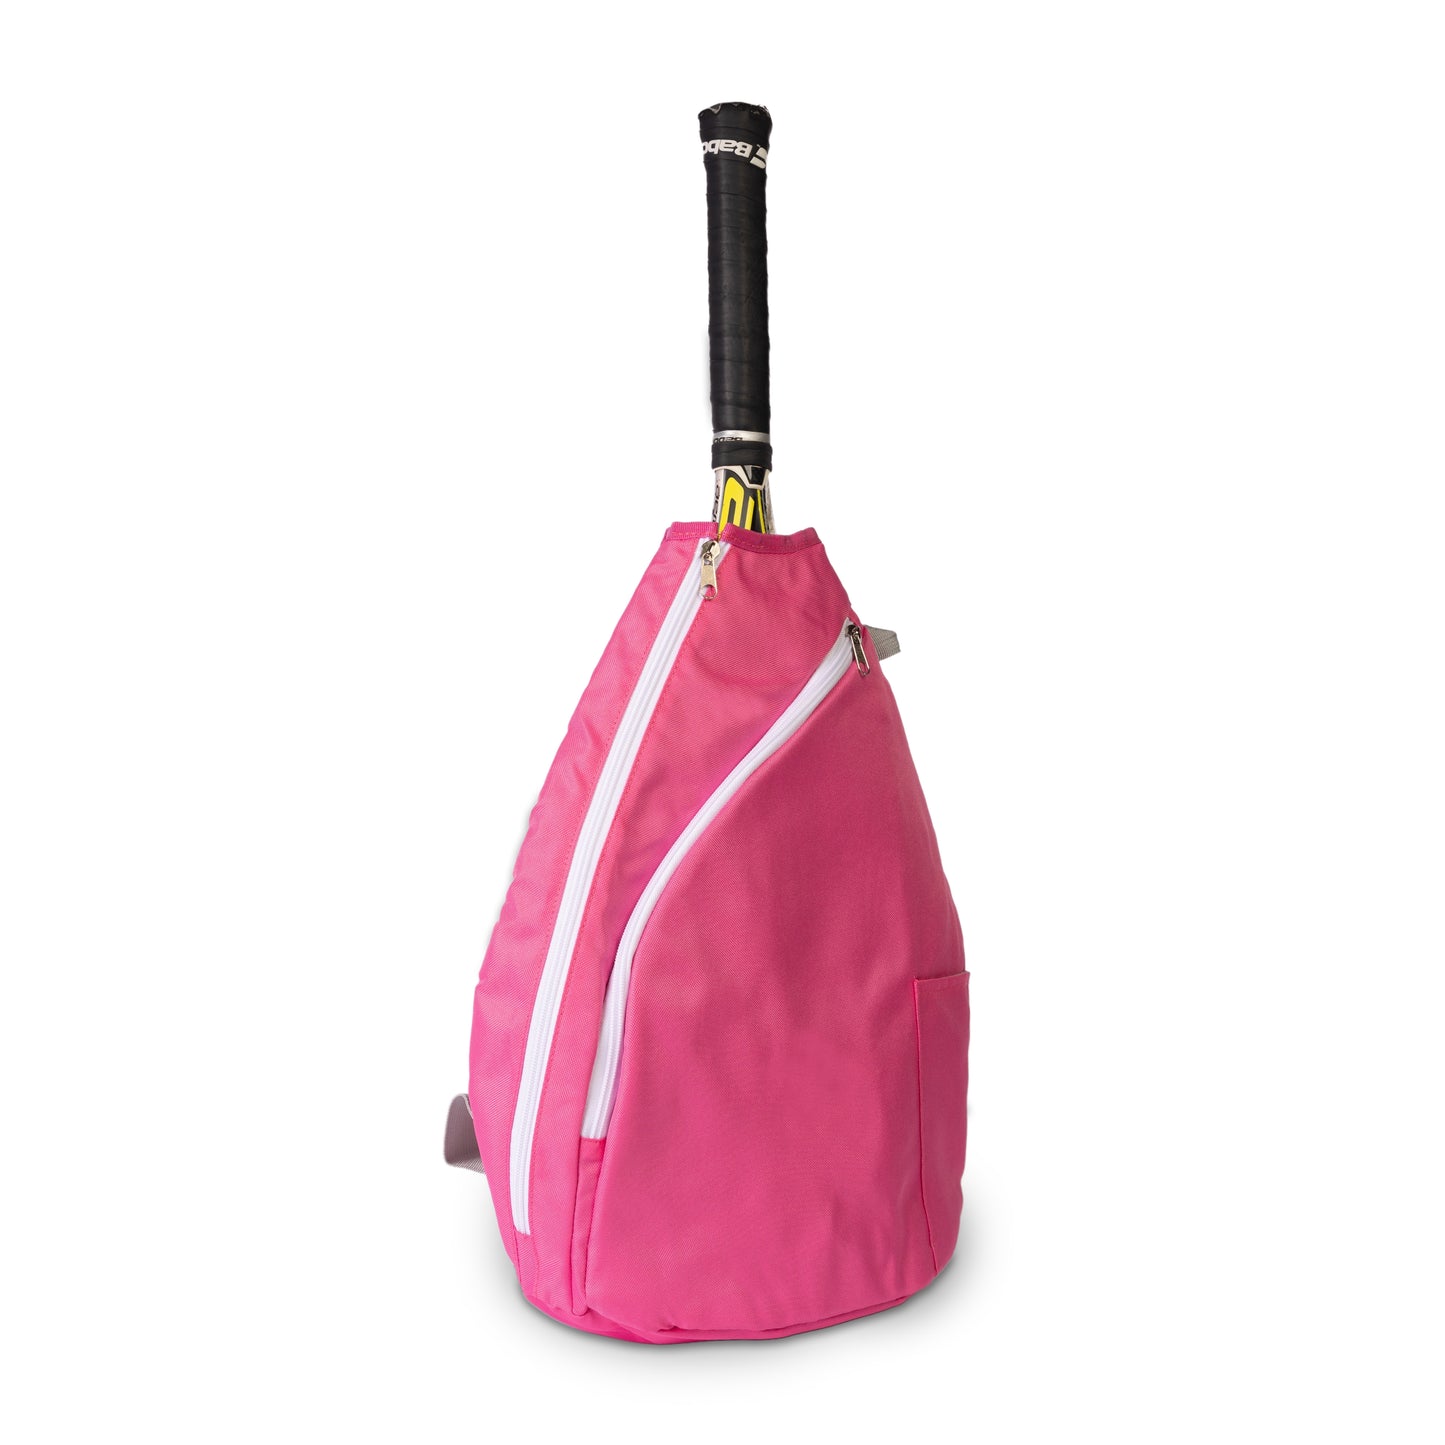 #Tennis Backpack: Bubble Gum Pink - New!